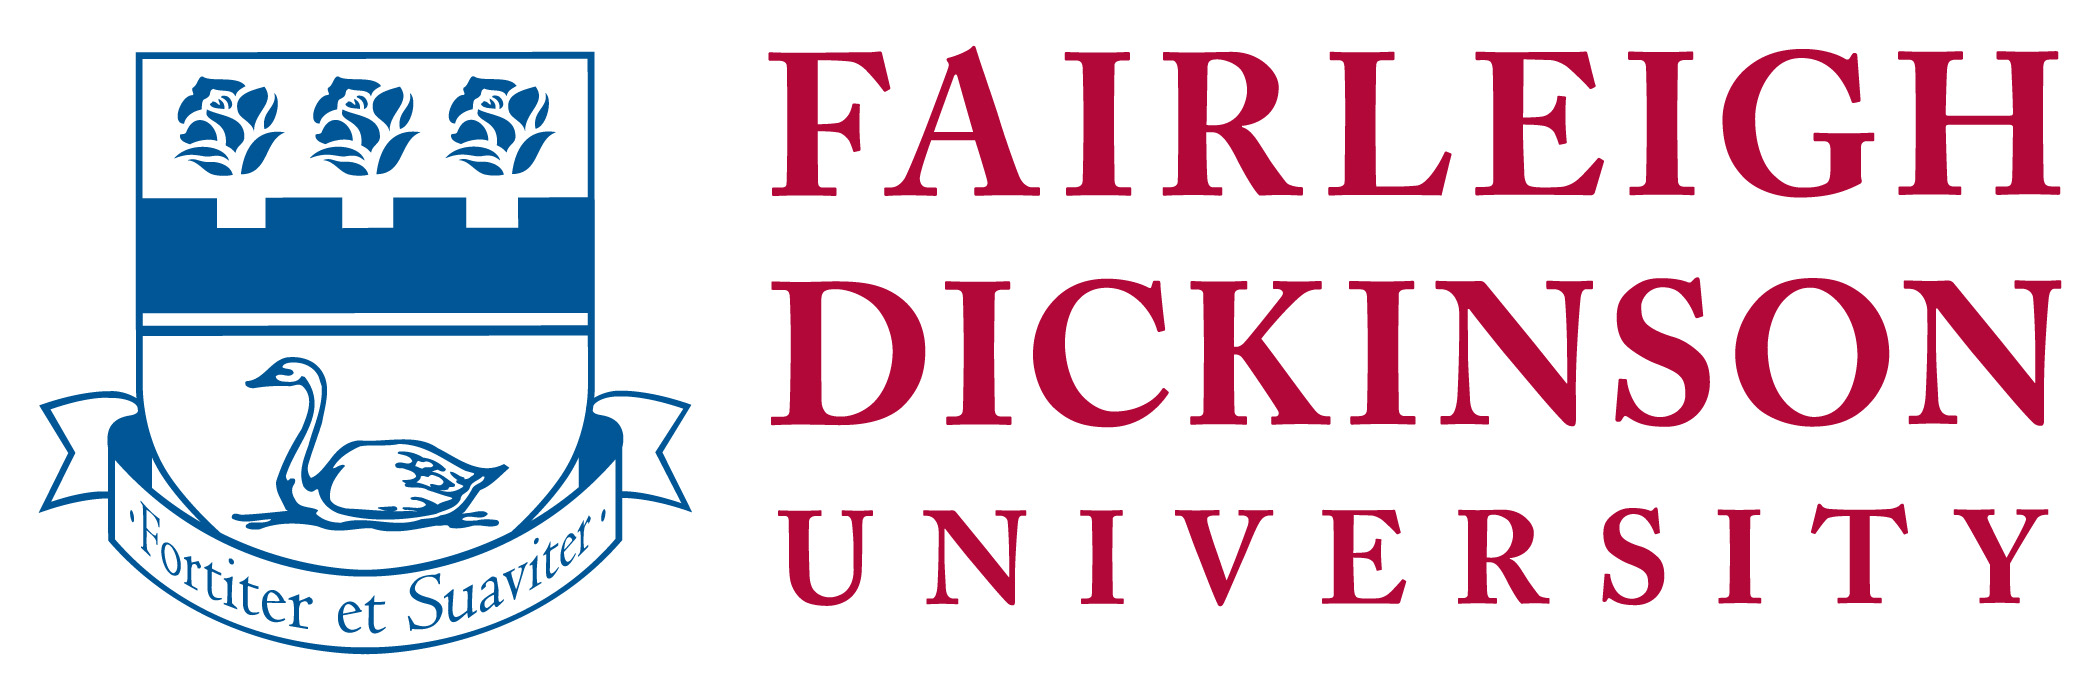 Available for Download | Fairleigh Dickinson University